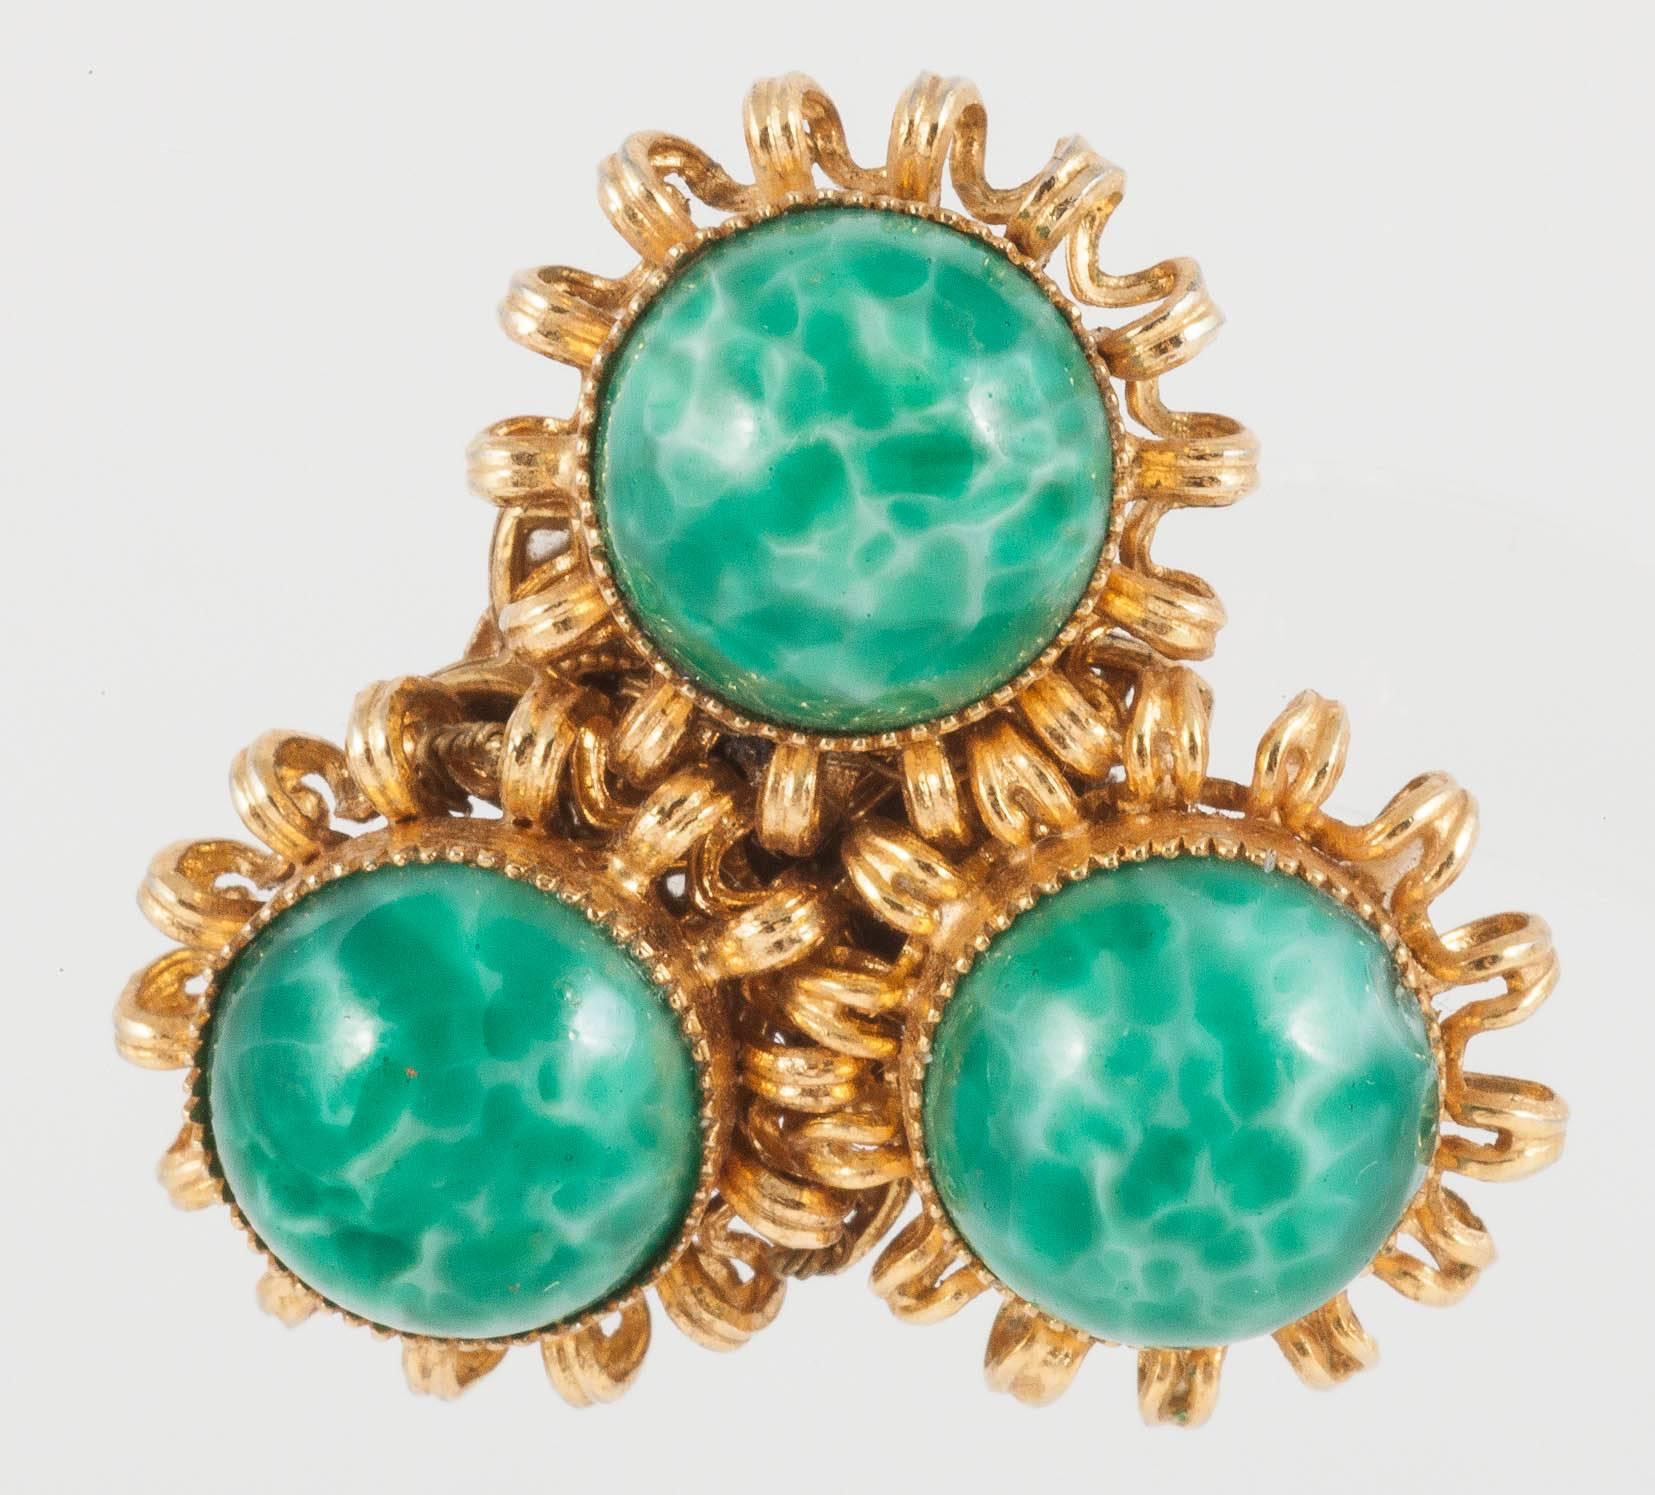 Perfect little green organic shaped earrings with lovely emerald green art glass centres.
William de Lillo had worked for Cartier, Tiffany and Harry Winston before setting up his own company with Robert F Clarke, former head designer for Miriam